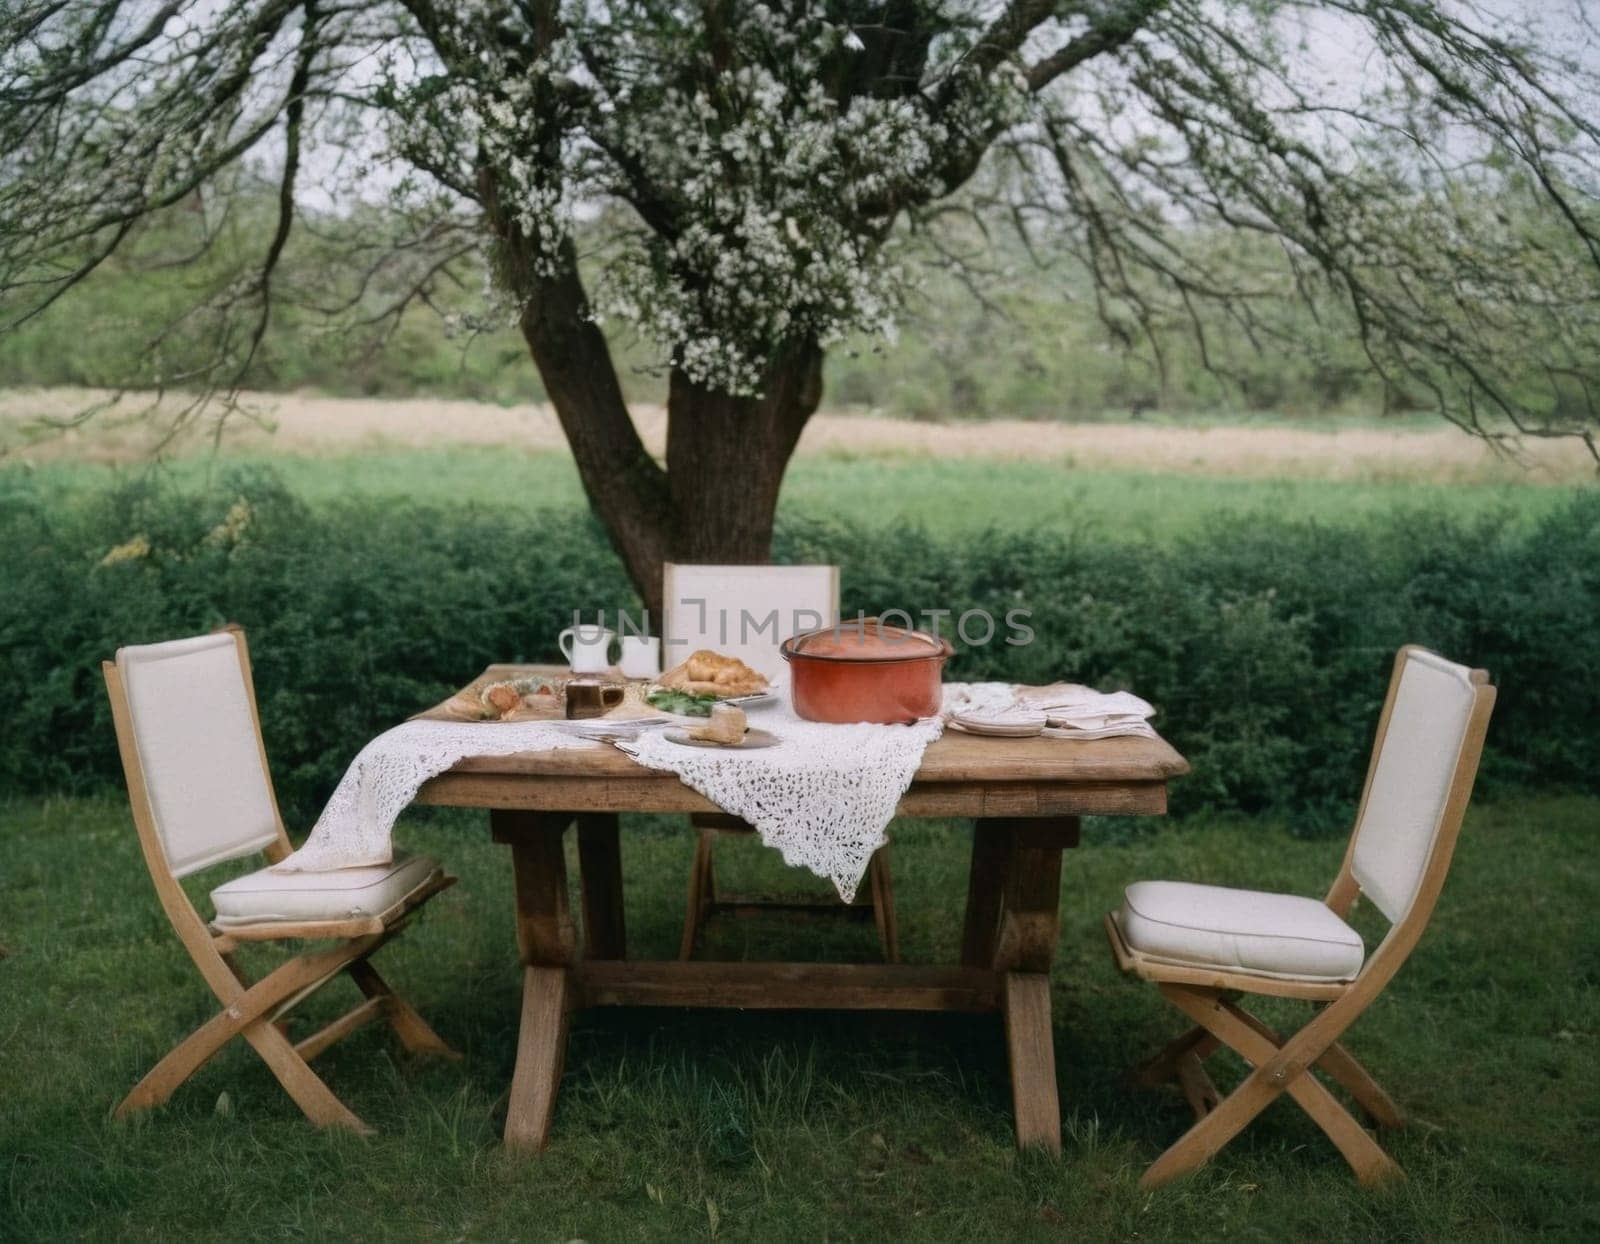 A table with a white tablecloth and a bunch of fruit on it. The table is set for a meal and there are two bottles on the table. Scene is relaxed and inviting. AI generation